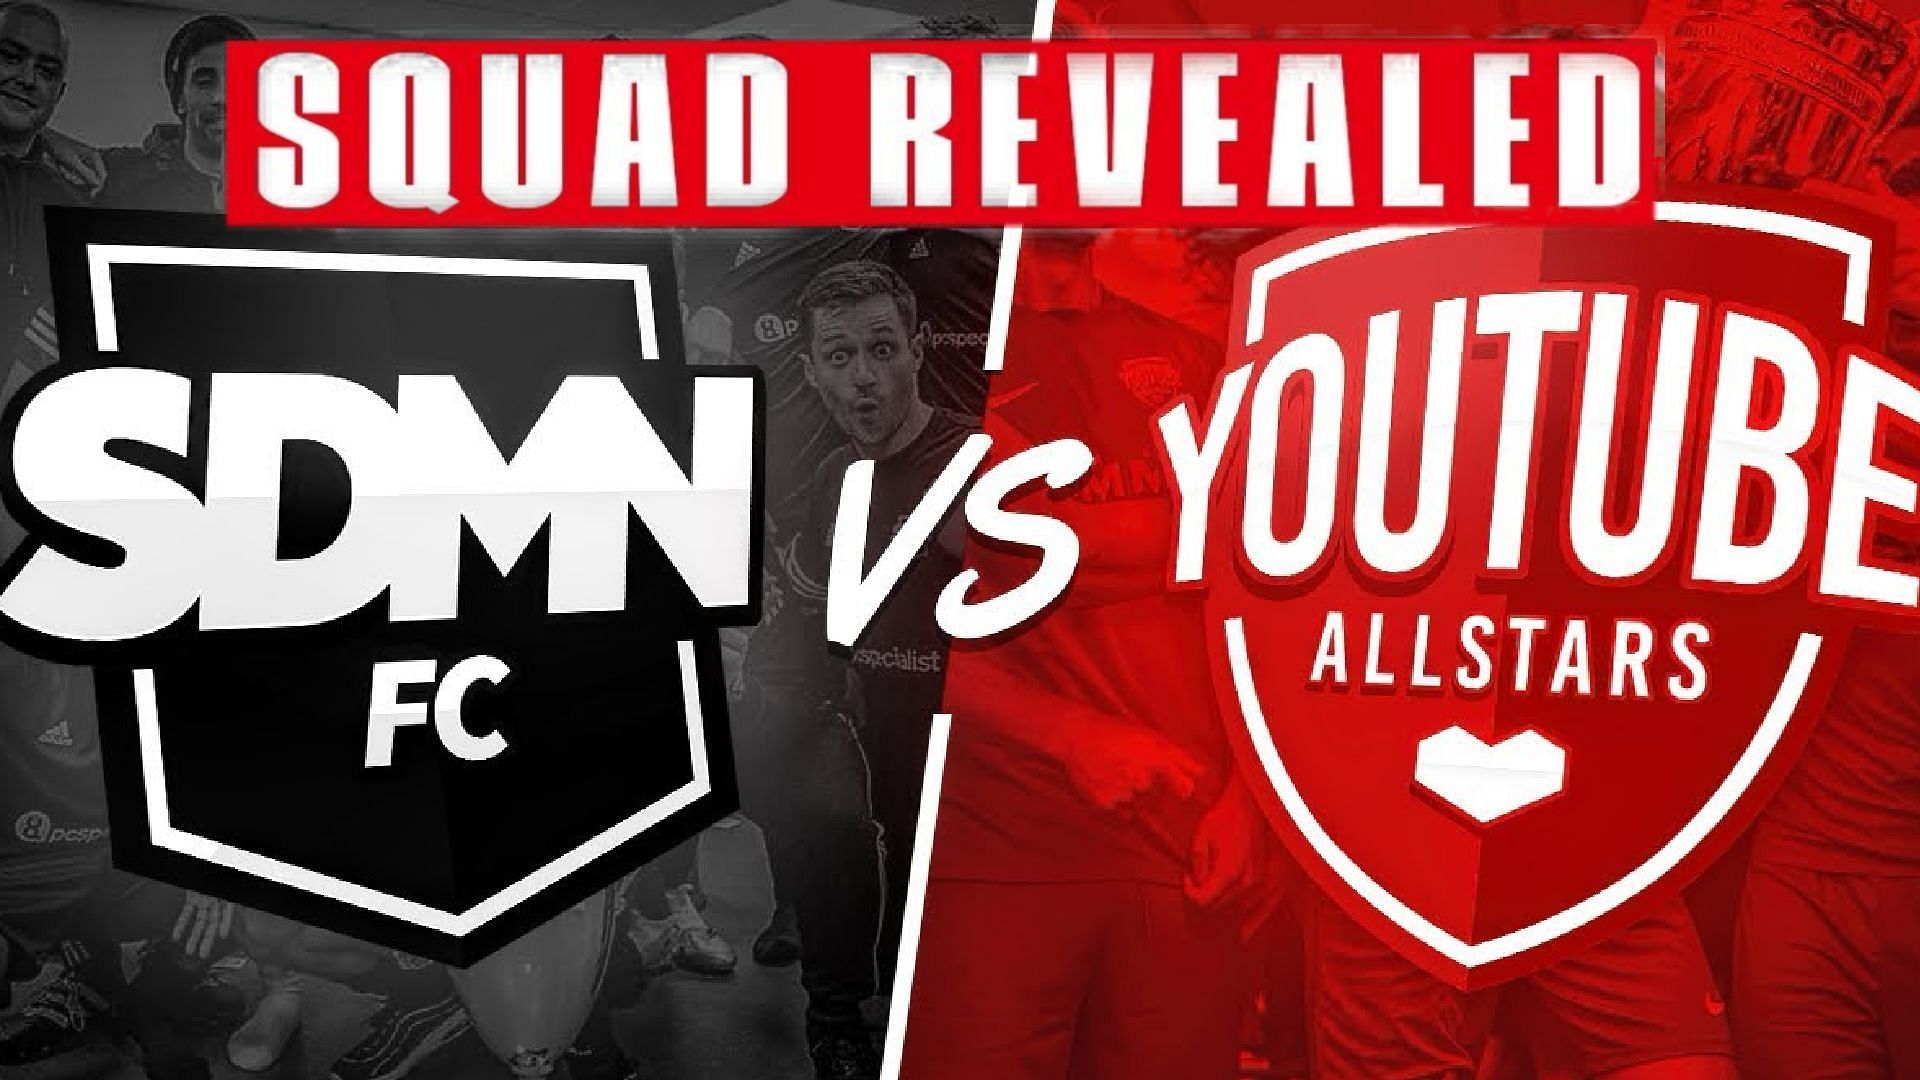 Sidemen FC vs YouTube All Stars charity football match Official squads